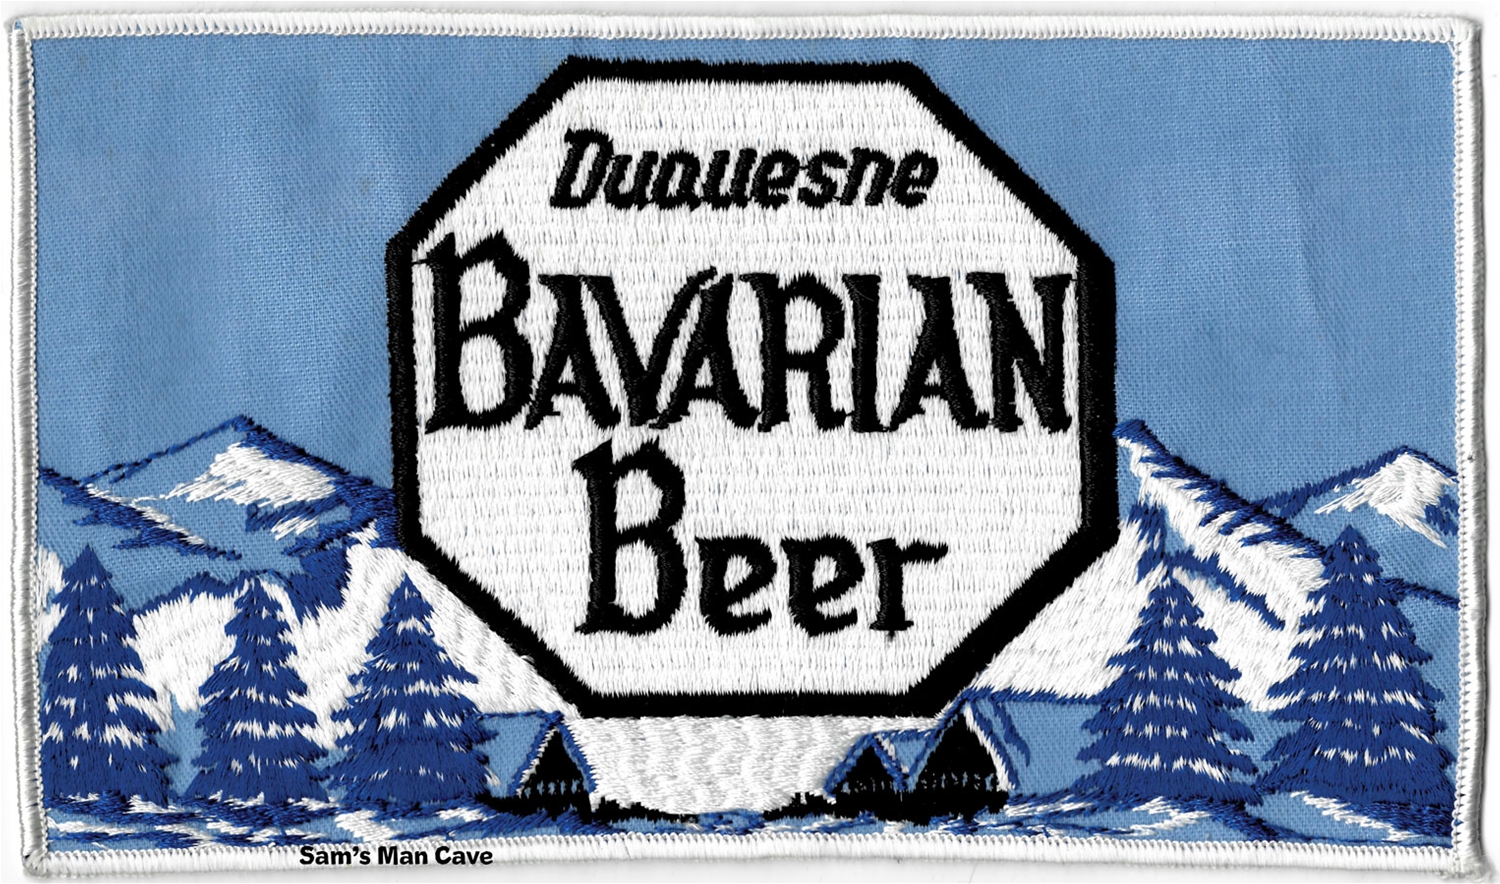 Duquesne Bavarian Beer Large Patch